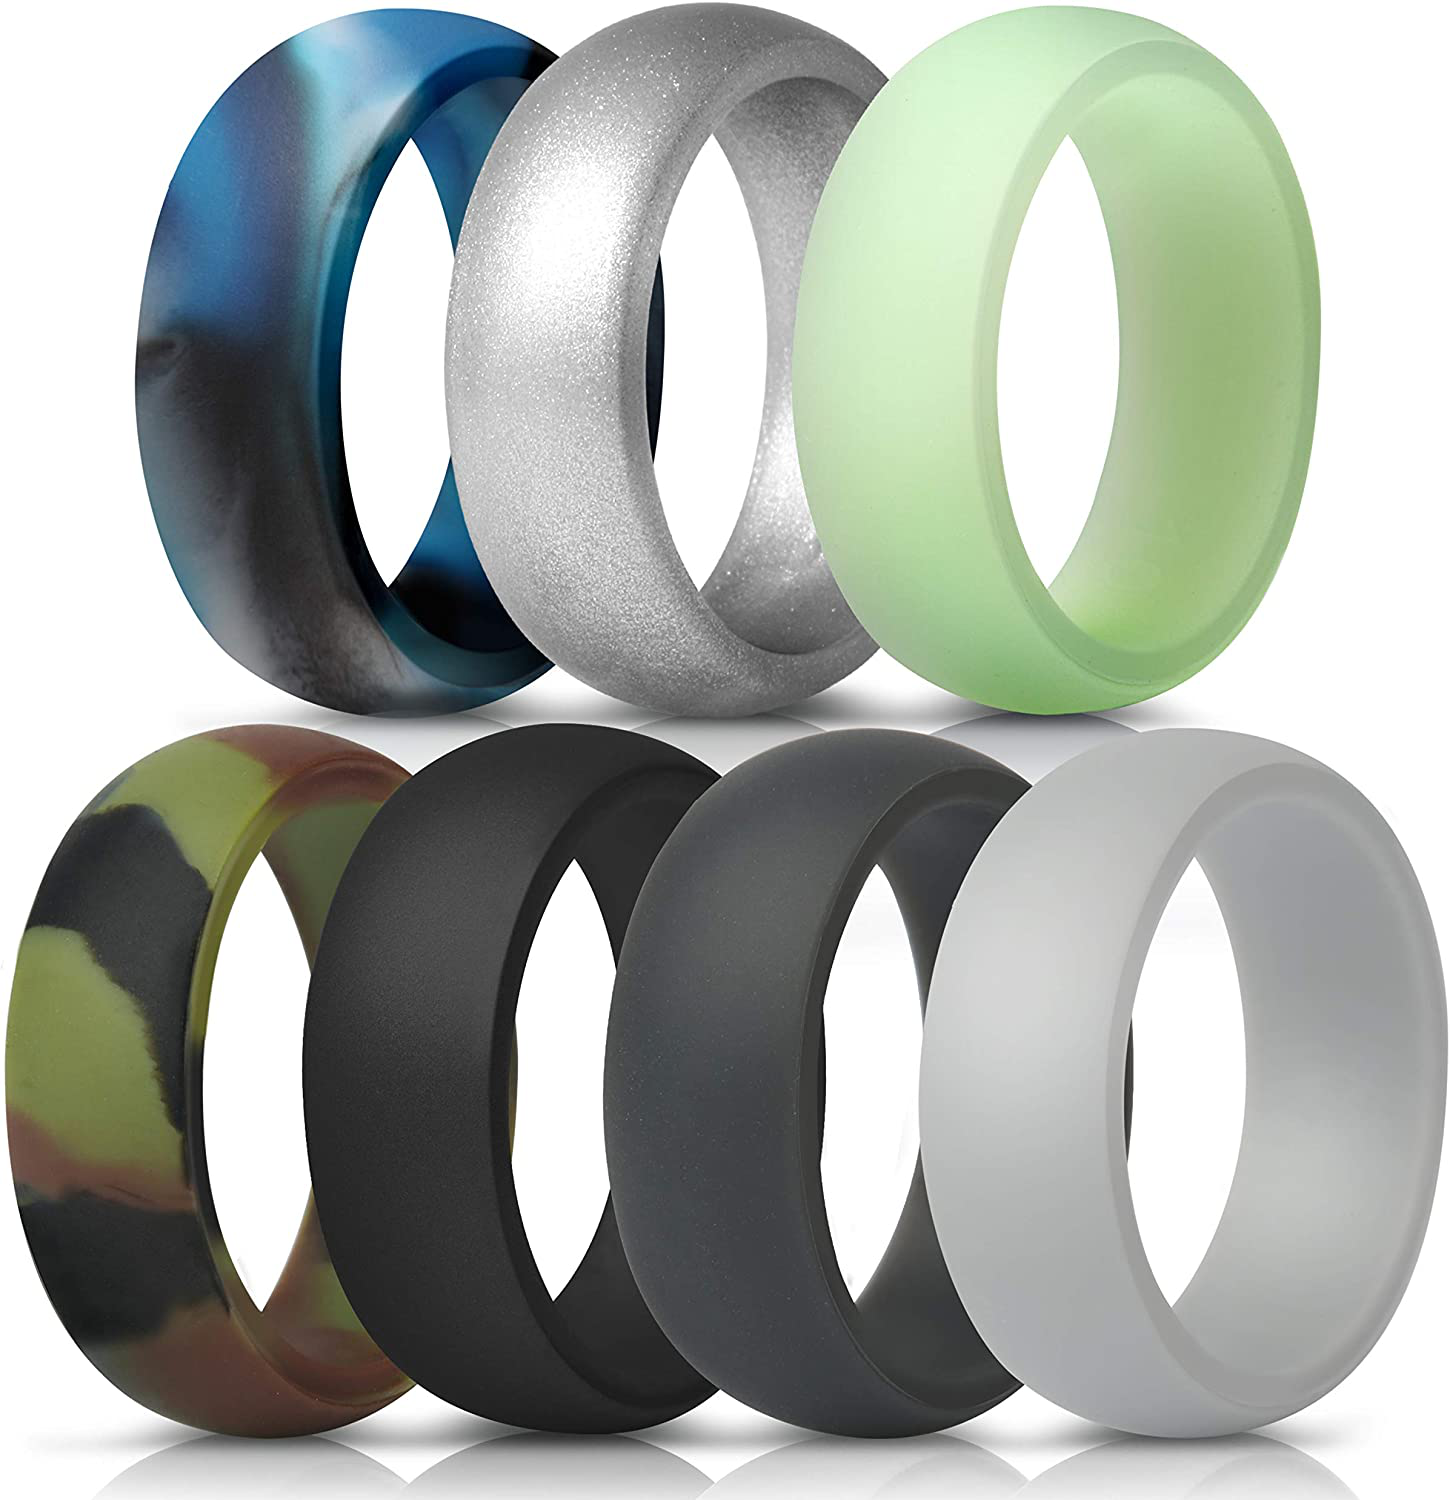 ThunderFit Silicone Wedding Rings for Men - Rubber Wedding Bands 8.7mm Wide (2mm Thick) - 7 Rings